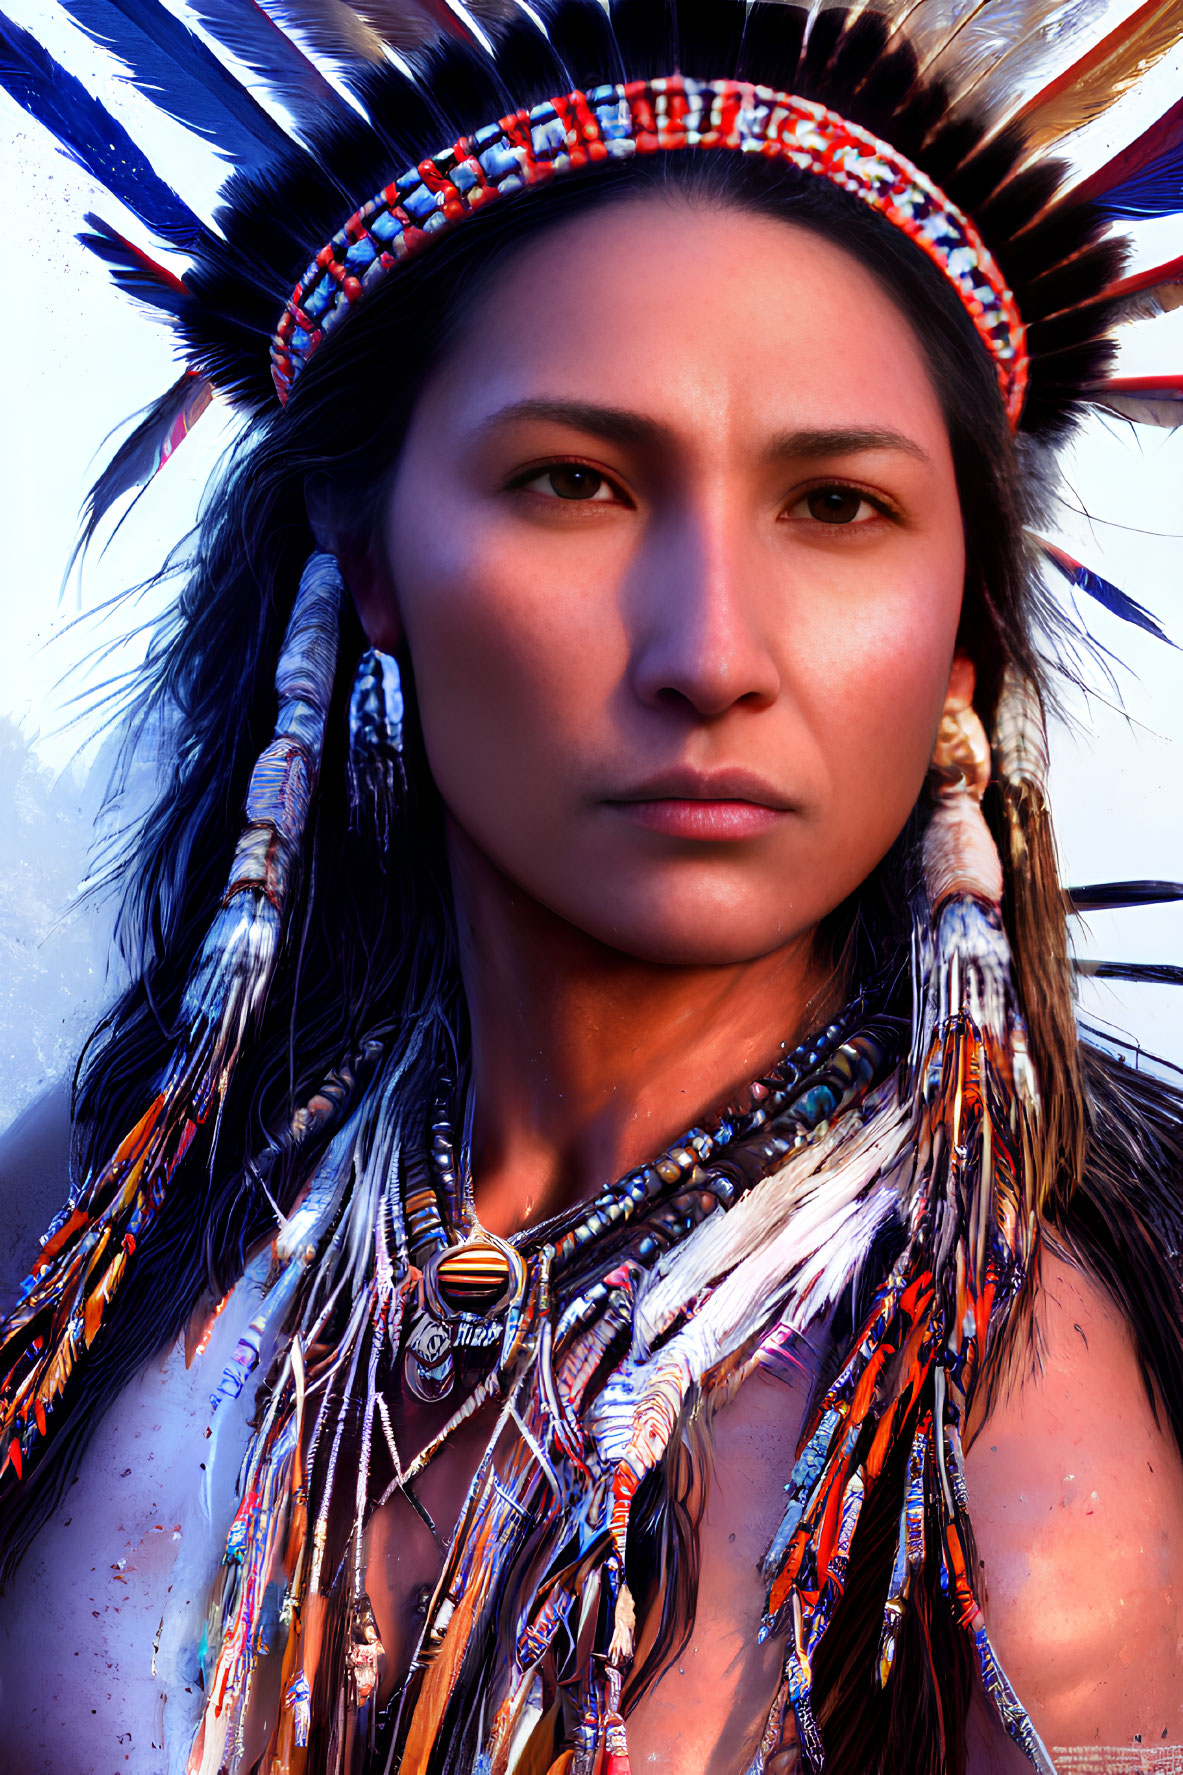 Detailed close-up of woman in Native American headdress with beadwork and feathers